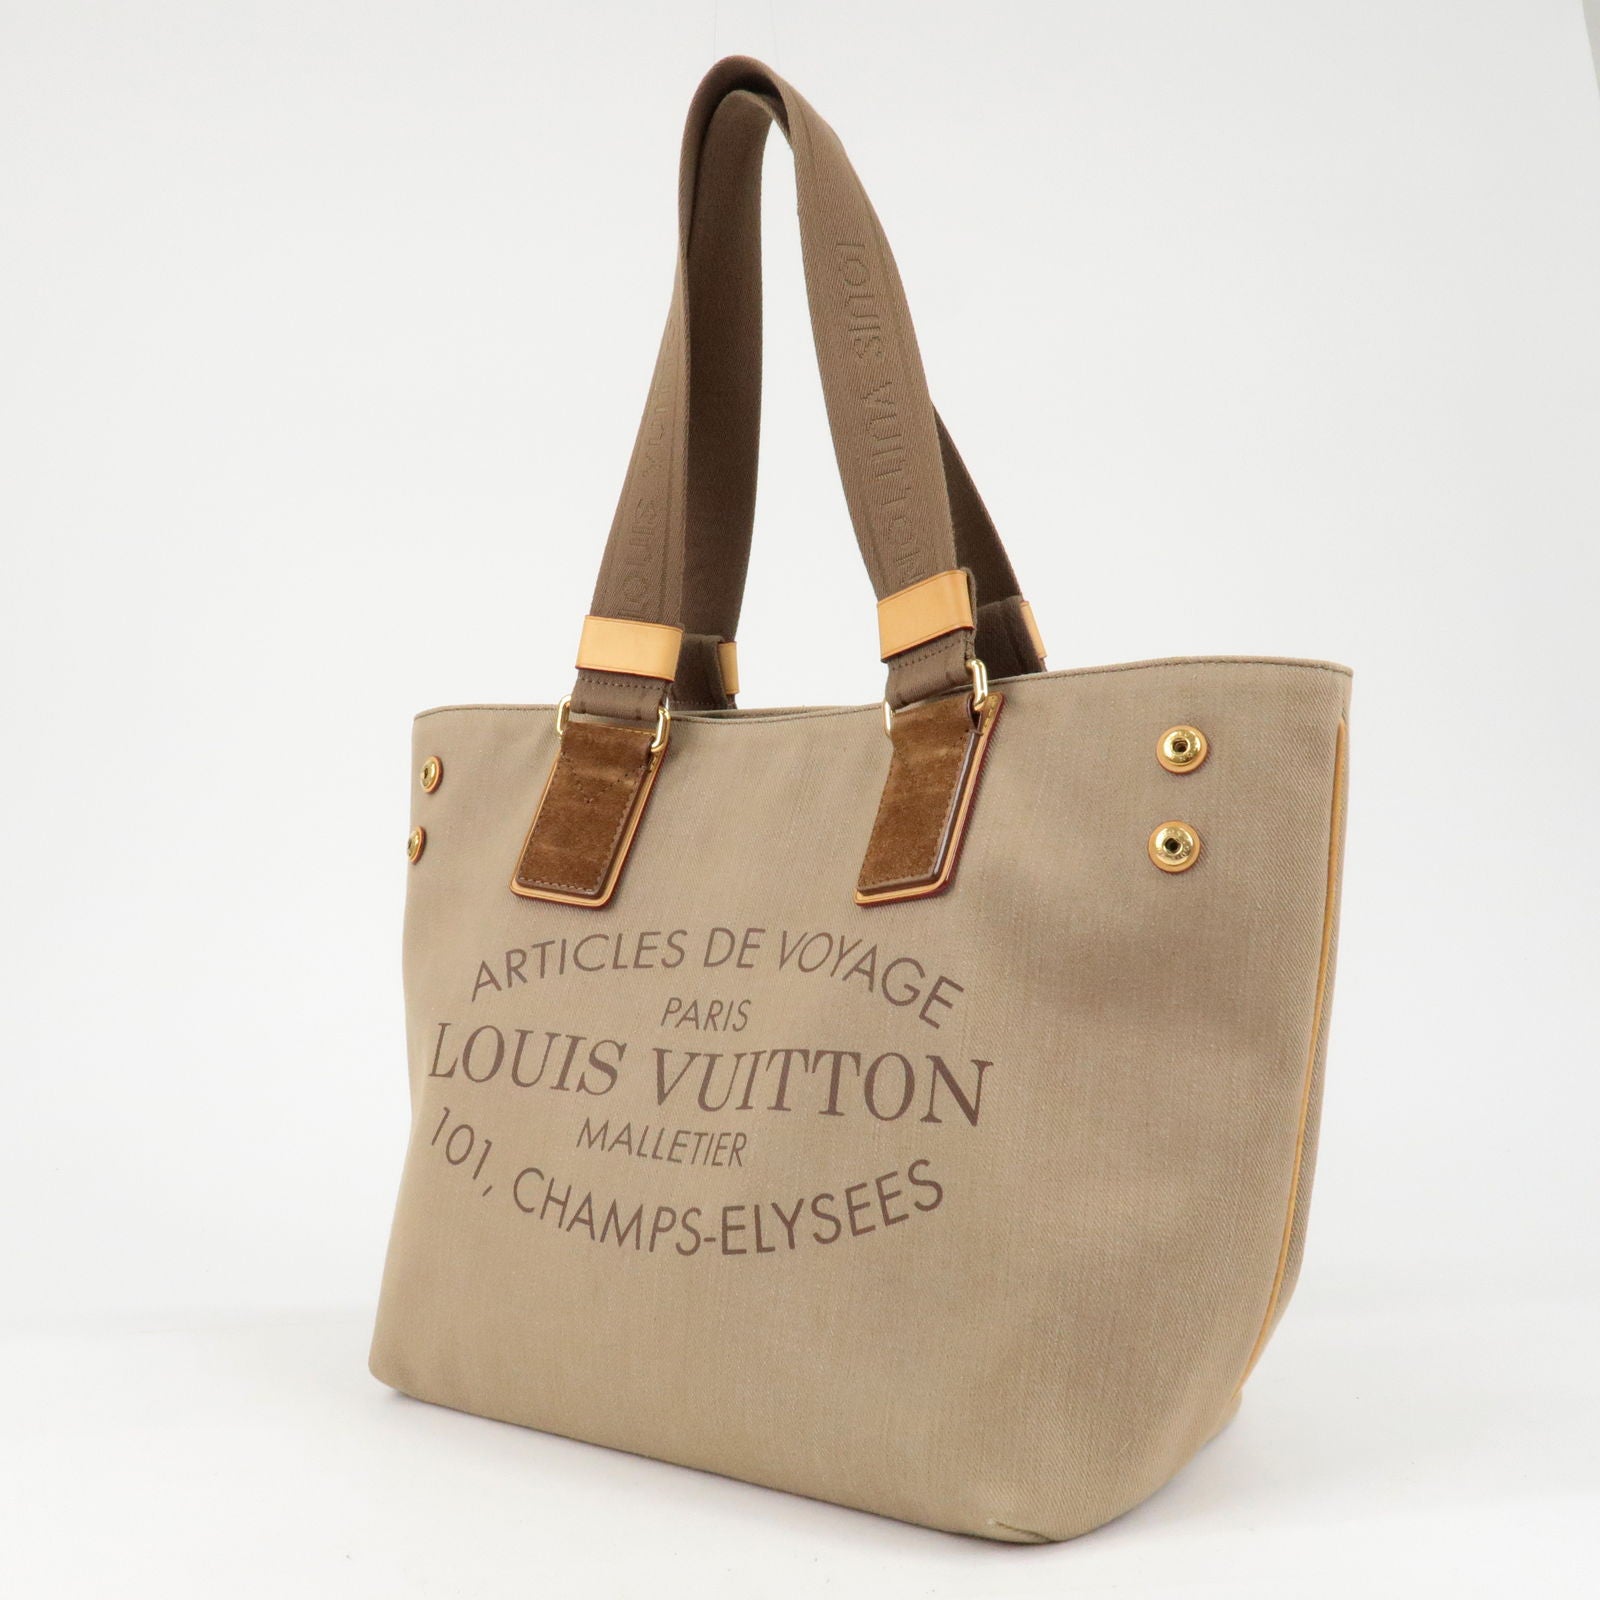 Louis Vuitton Bucket Pm Brown Canvas Tote Bag (Pre-Owned)